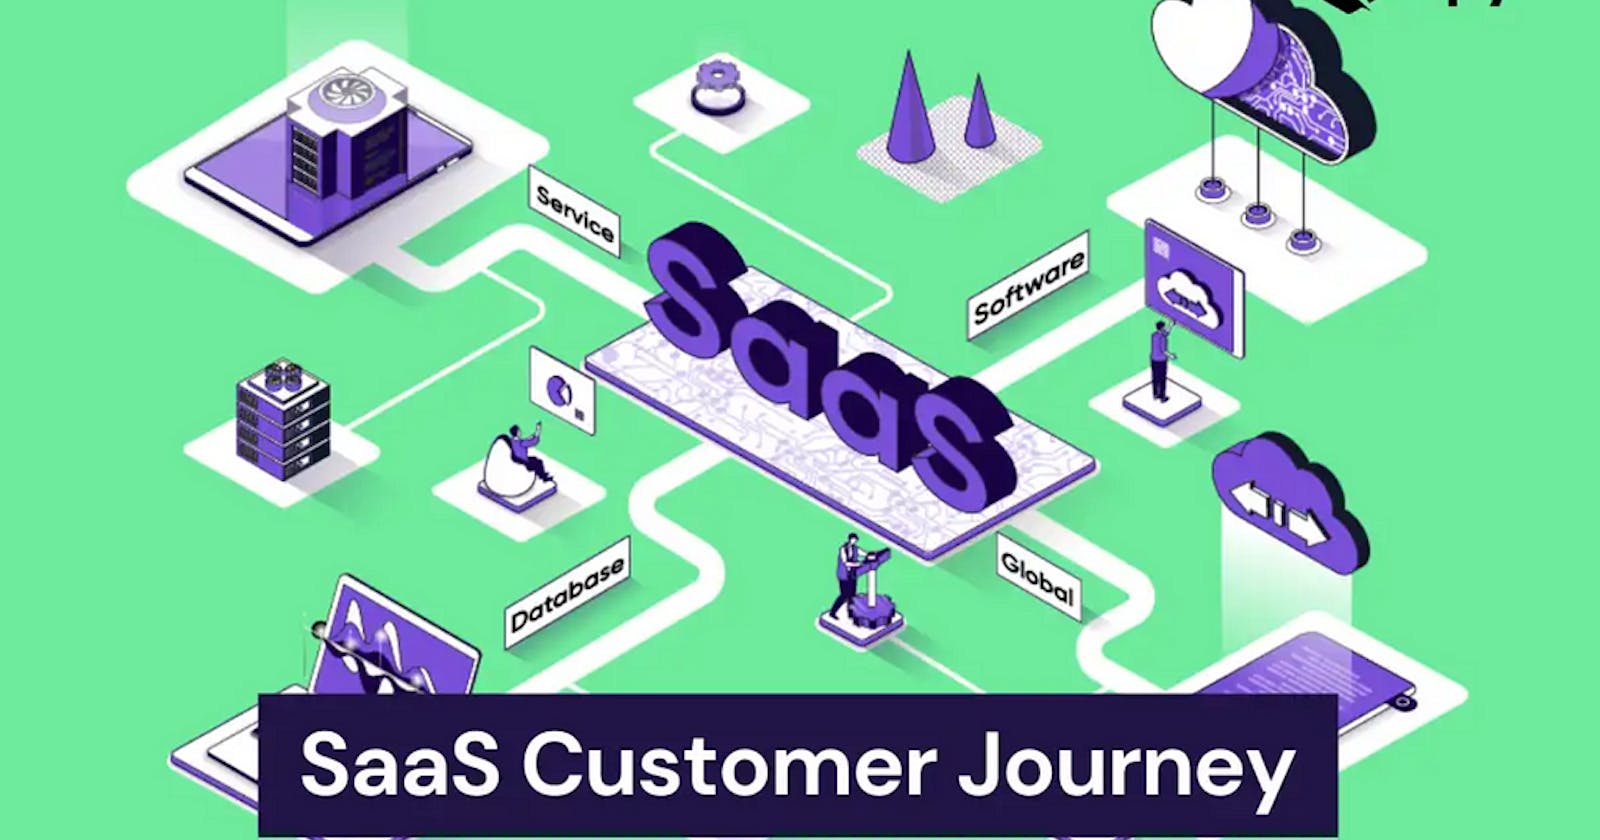 Cloud-driven experiences: How to optimize SaaS Customer Journey?